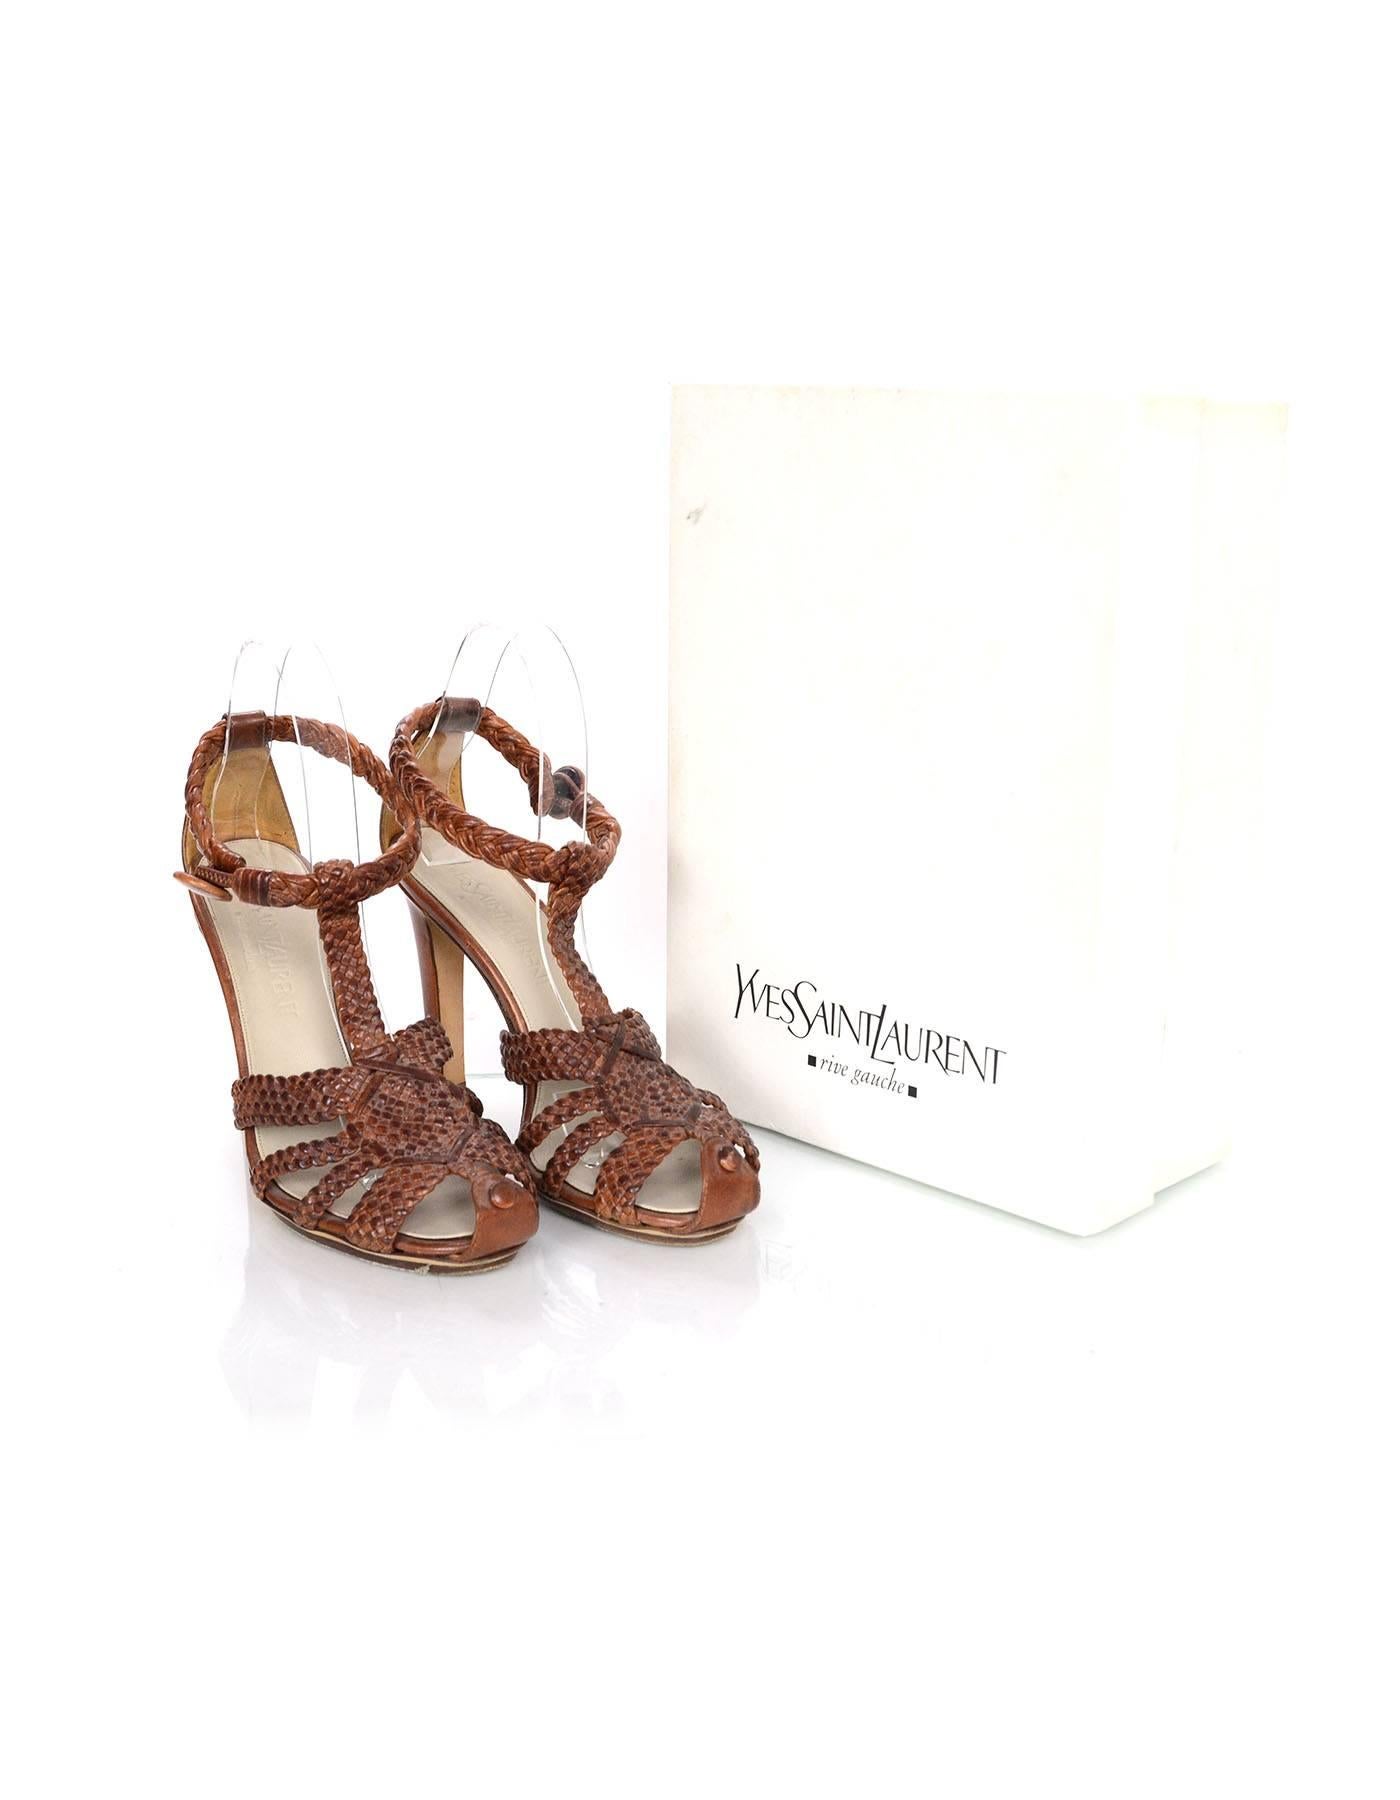 Yves Saint Laurent Brown Braided Leather Strappy Sandals sz 37 2